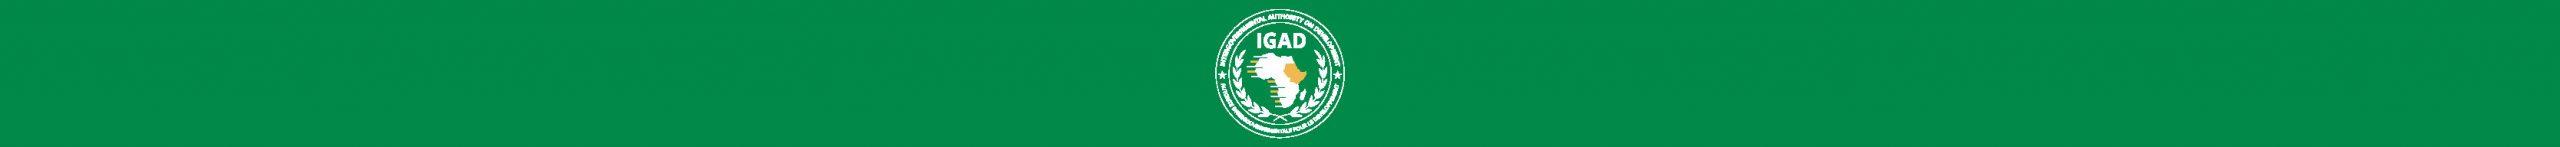 Technical Expert-Consultant Institution to Assist IGAD in the Implementation of the Project “Enhancing a Shared Vision of Opportunities and Challenges in the Red Sea Region